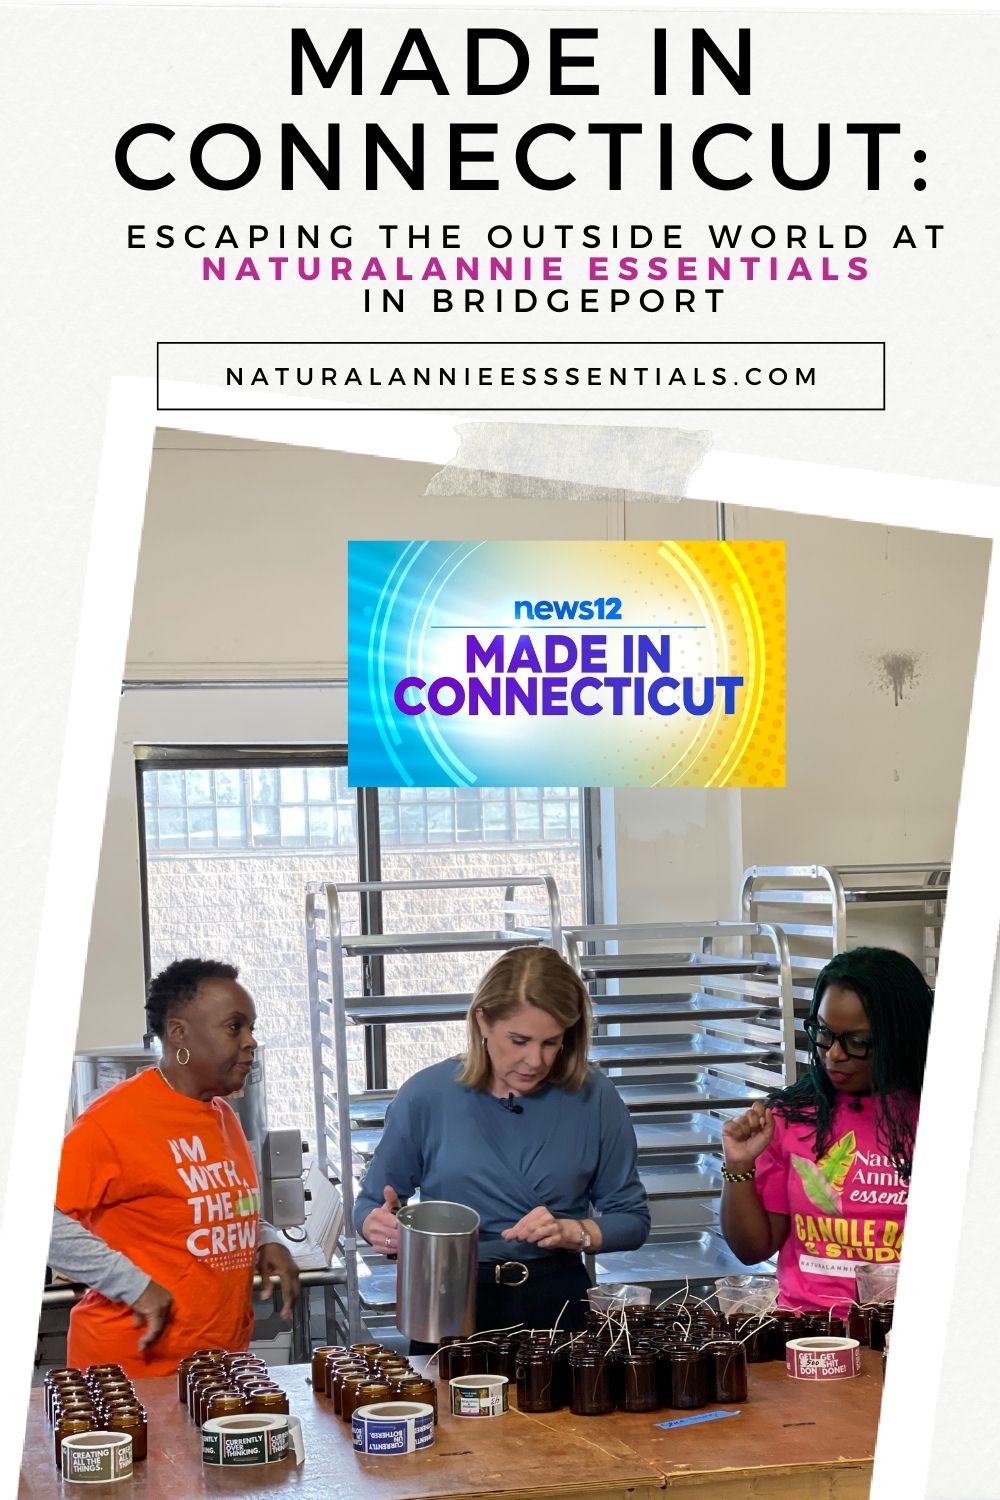 Made In Connecticut: Escaping the outside world at NaturalAnnie Essentials in Bridgeport